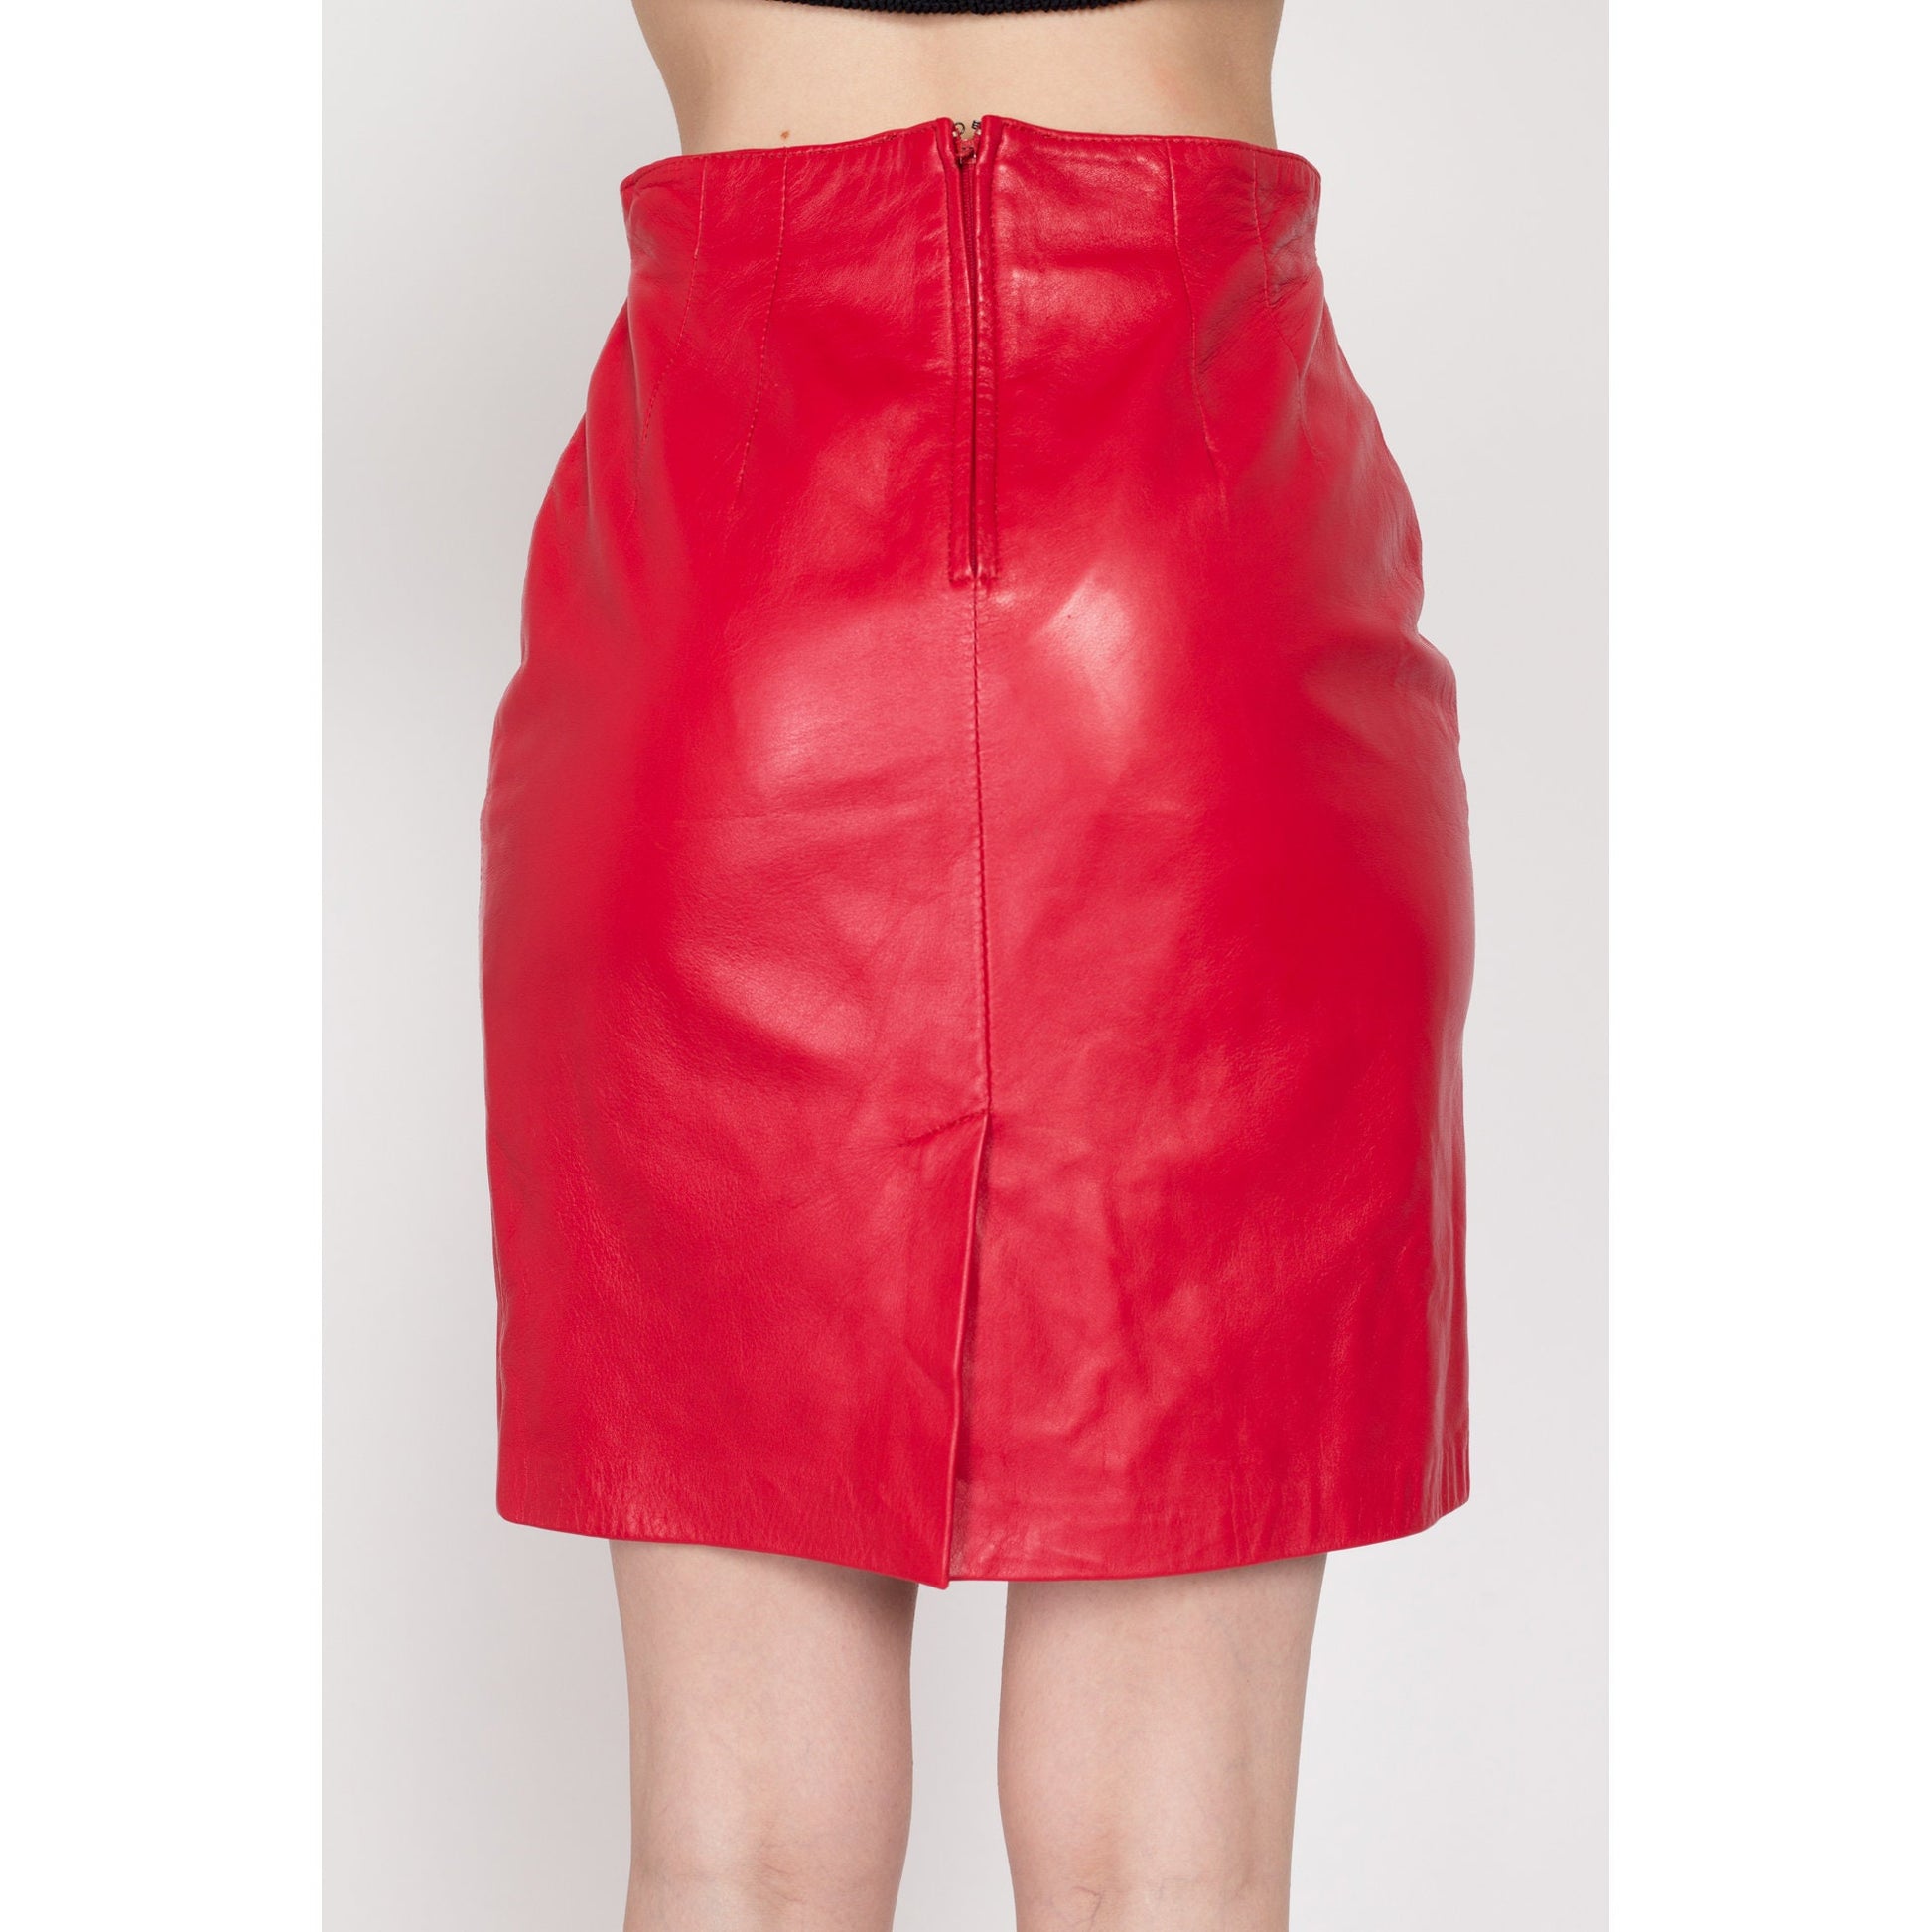 Small 90s Red Leather Pencil Skirt | Vintage High Waisted Rocker Fitted Mini Skirt